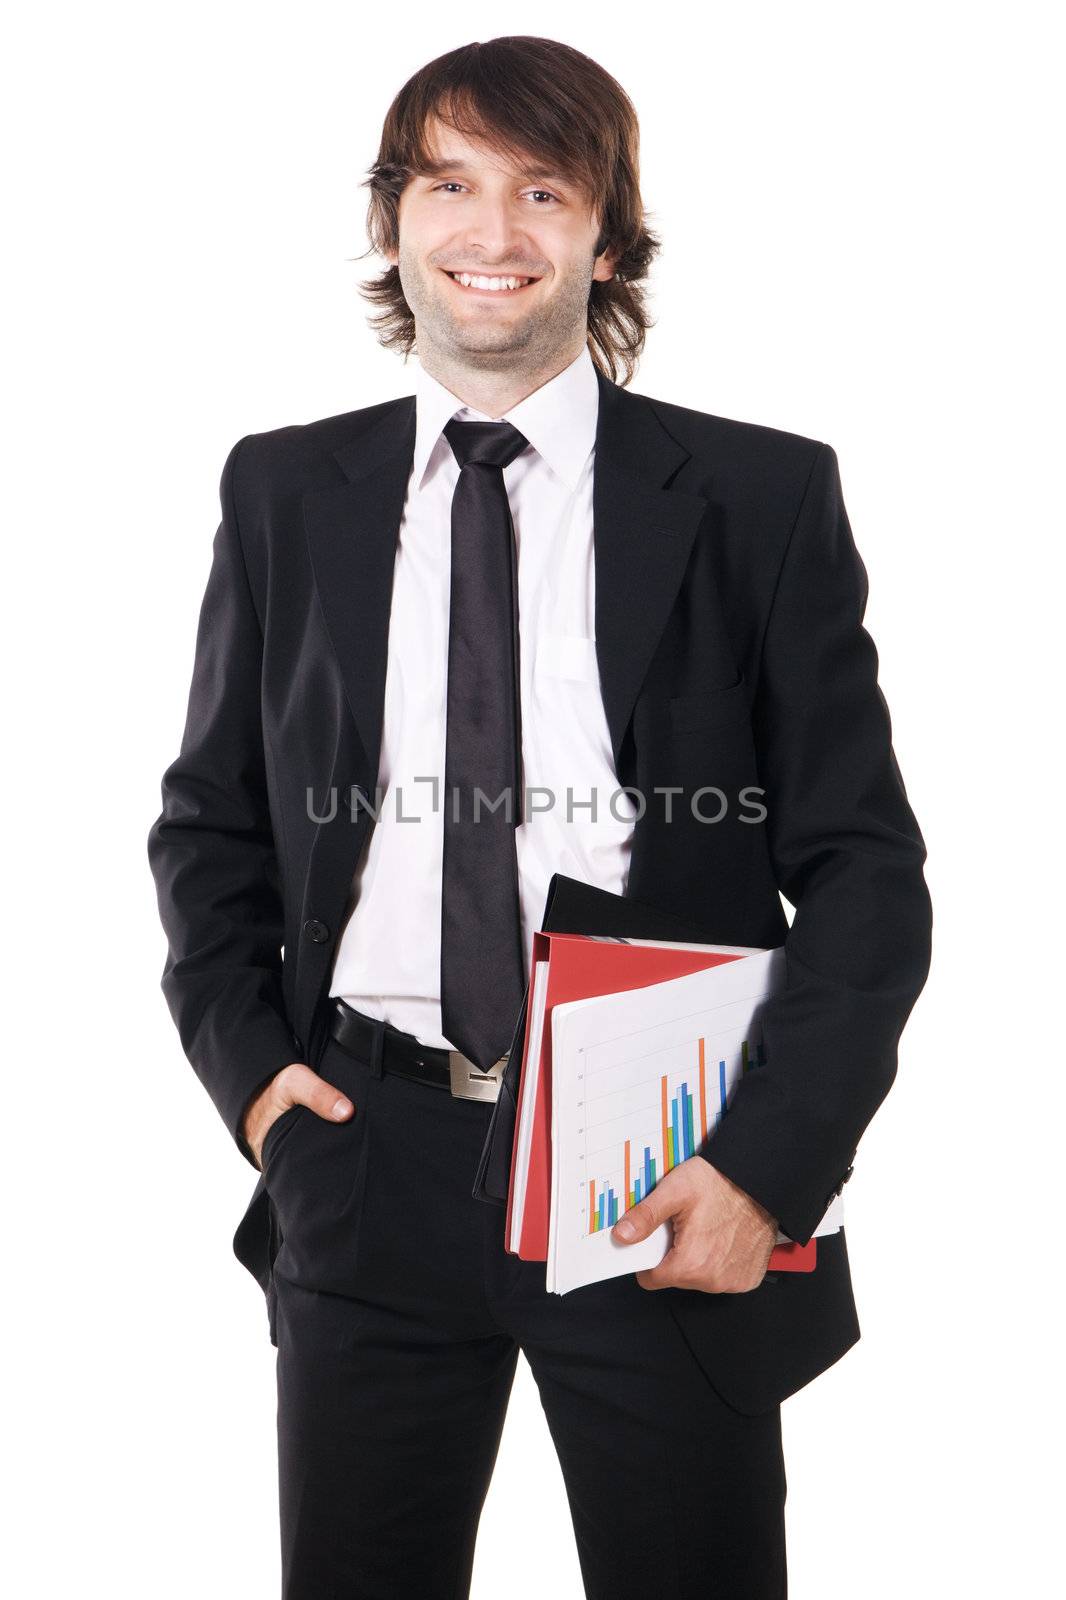 Cheerful businessman with a papers and folders against white background